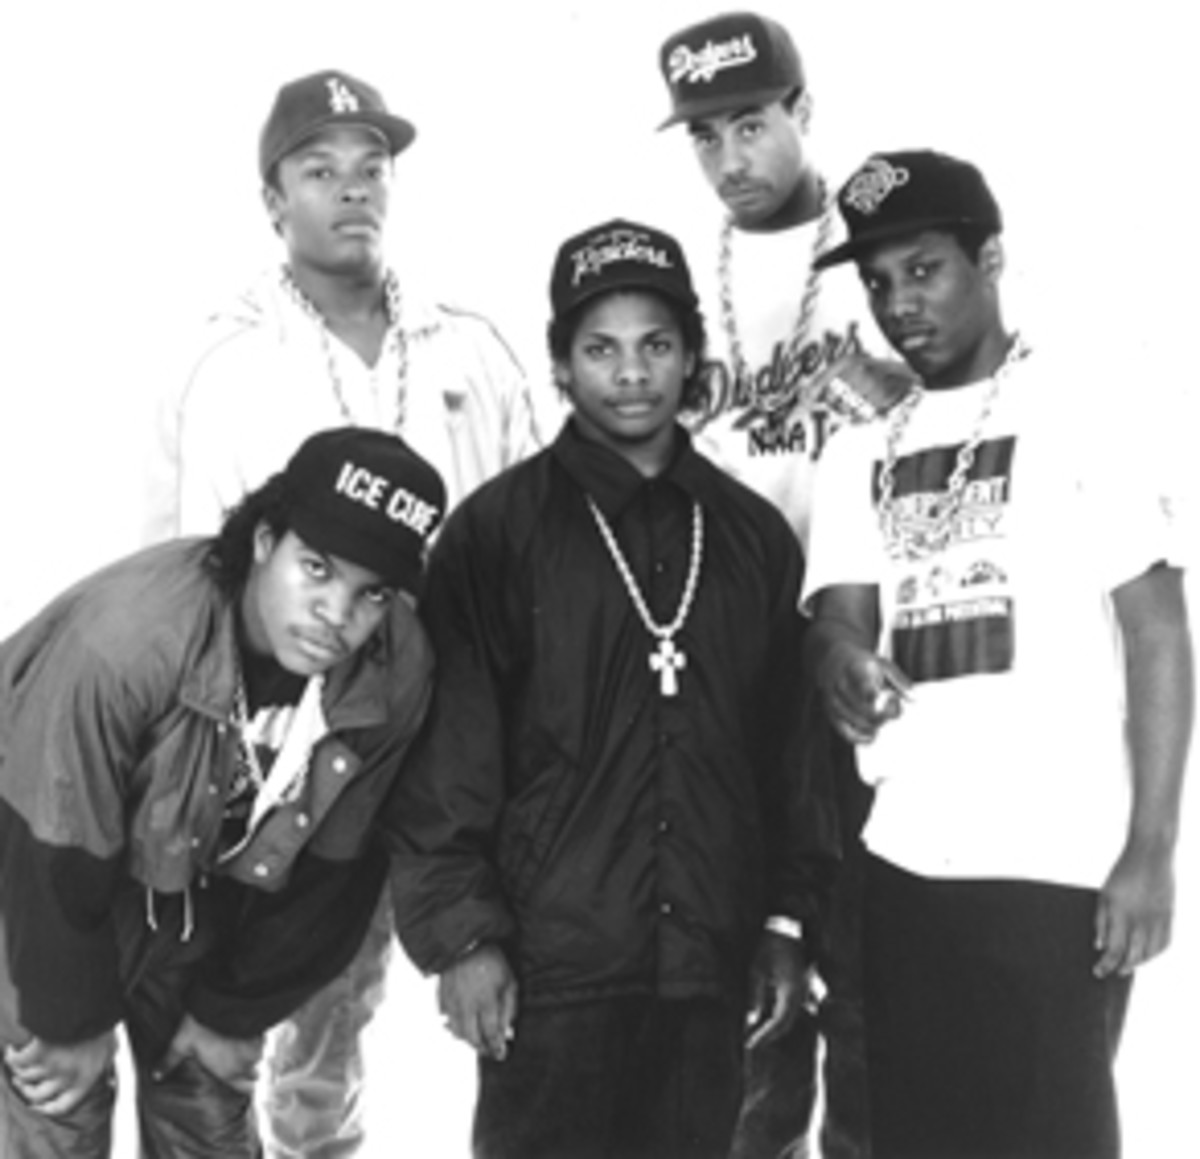 NWA. Courtesy Rock And Roll Hall of Fame.